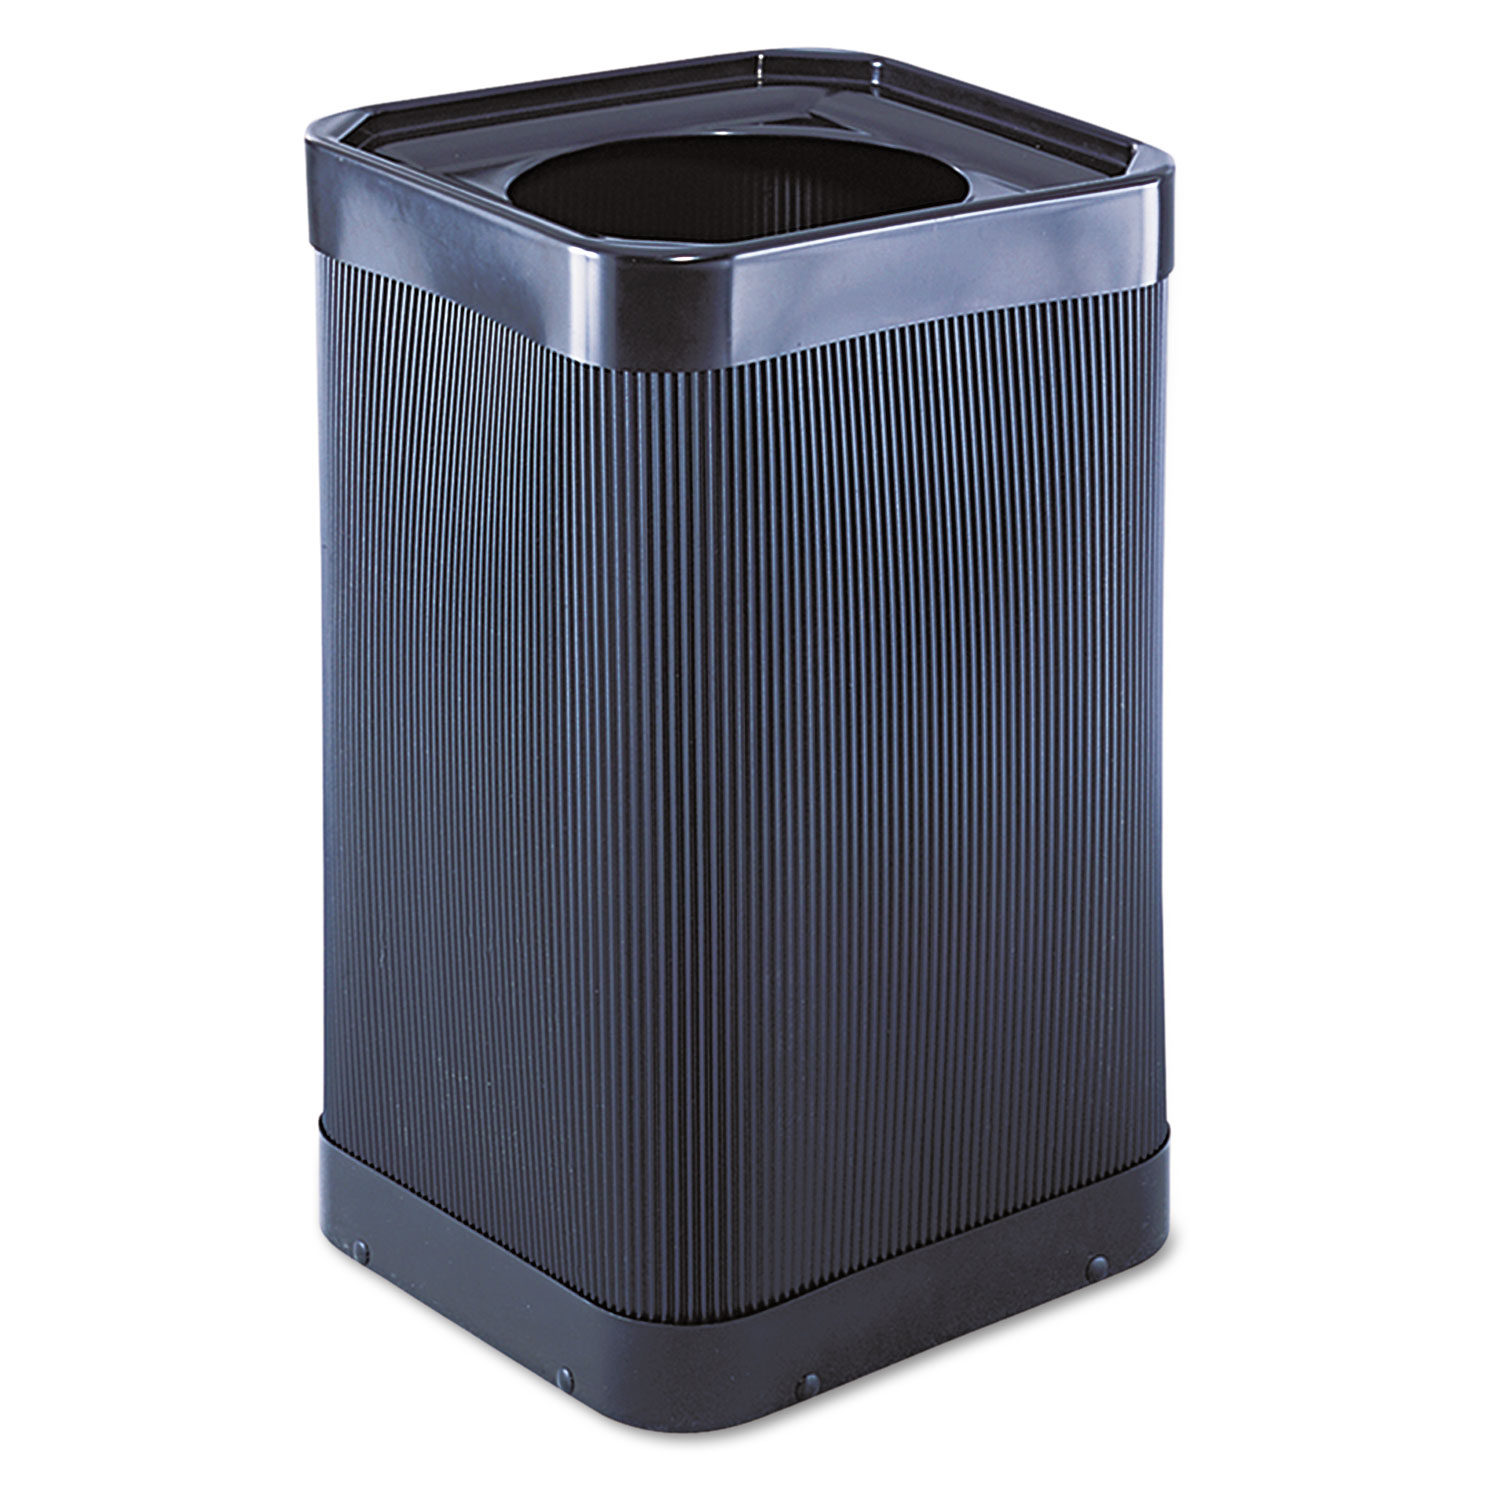 Safco® At-Your Disposal Top-Open Waste Receptacle, Square